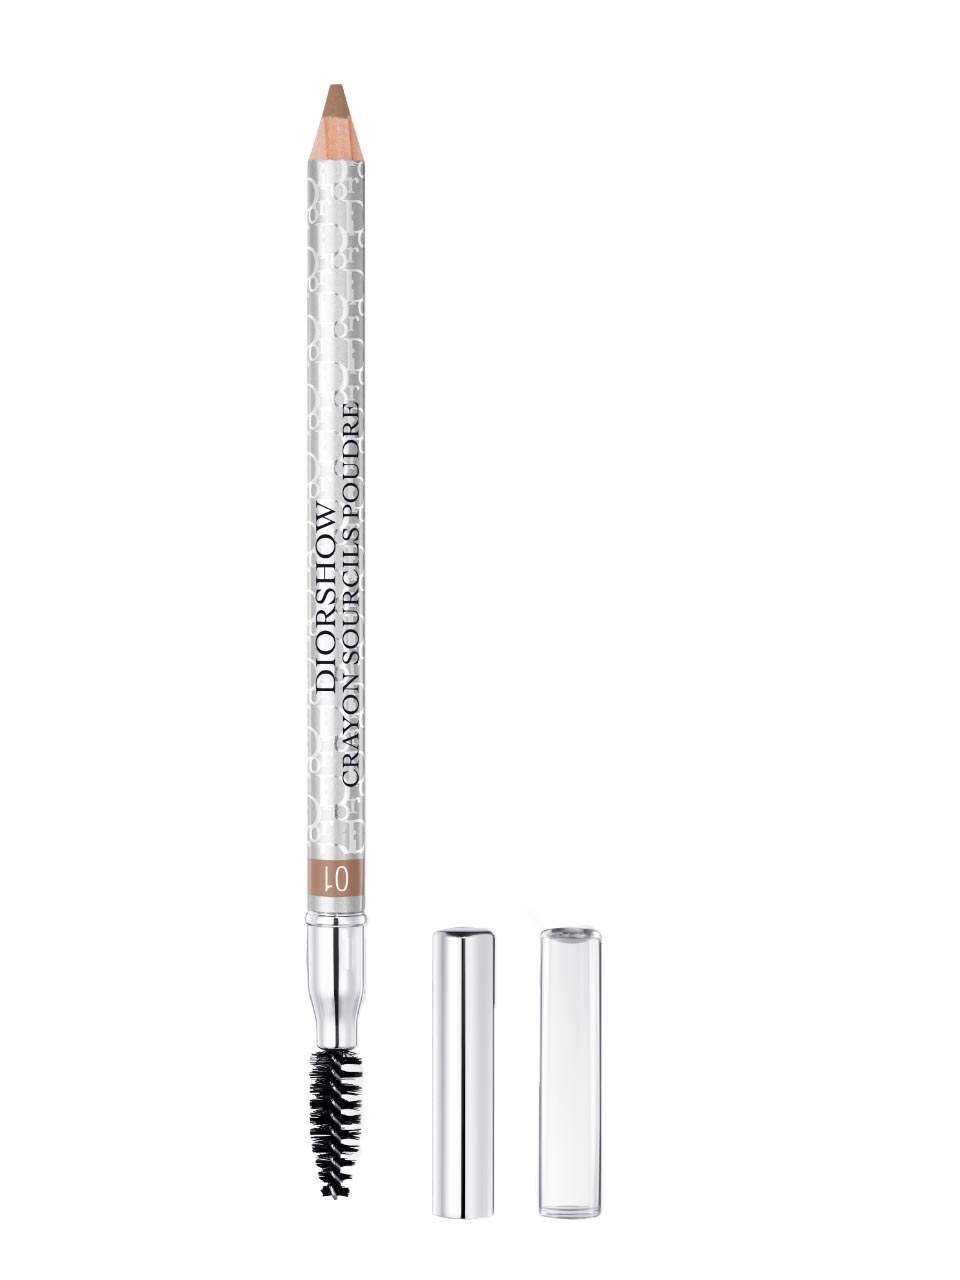 Dior Diorshow Expert Crayons Sourcils Poudre Eyebrow Pencil N° 01 Blond null - onesize - 1